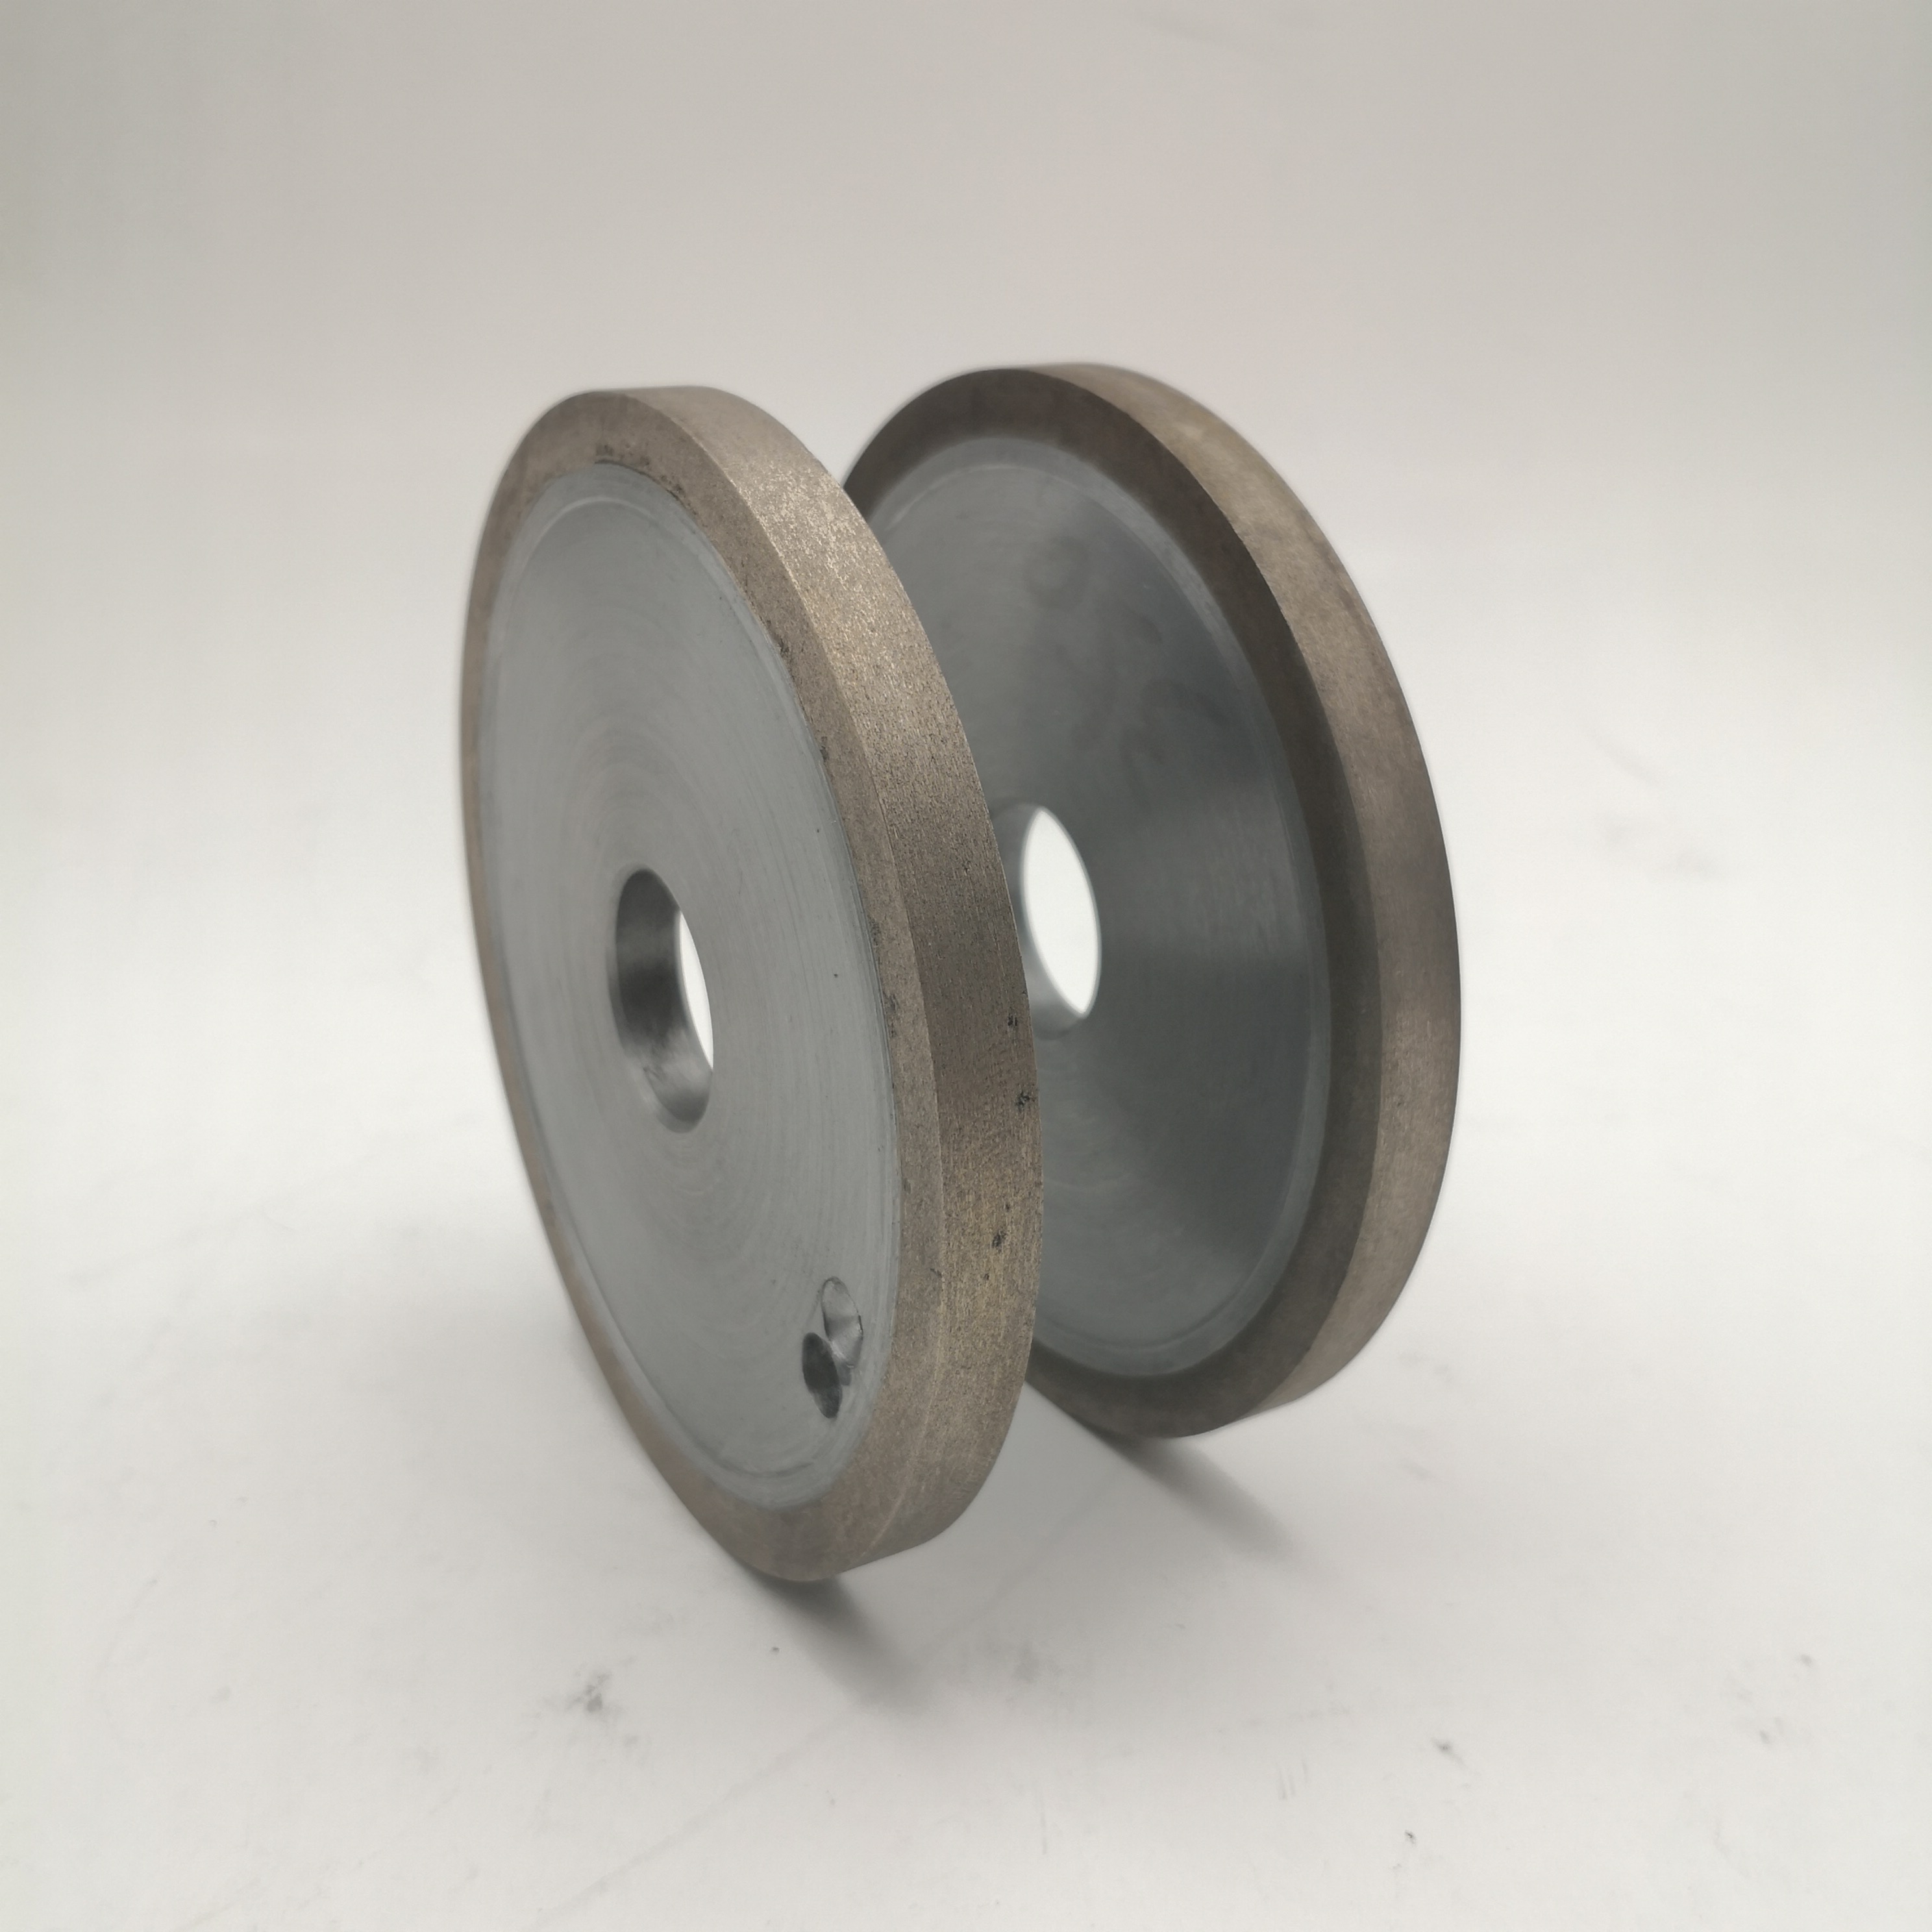 The Advantages of Metal Bond Grinding Wheels